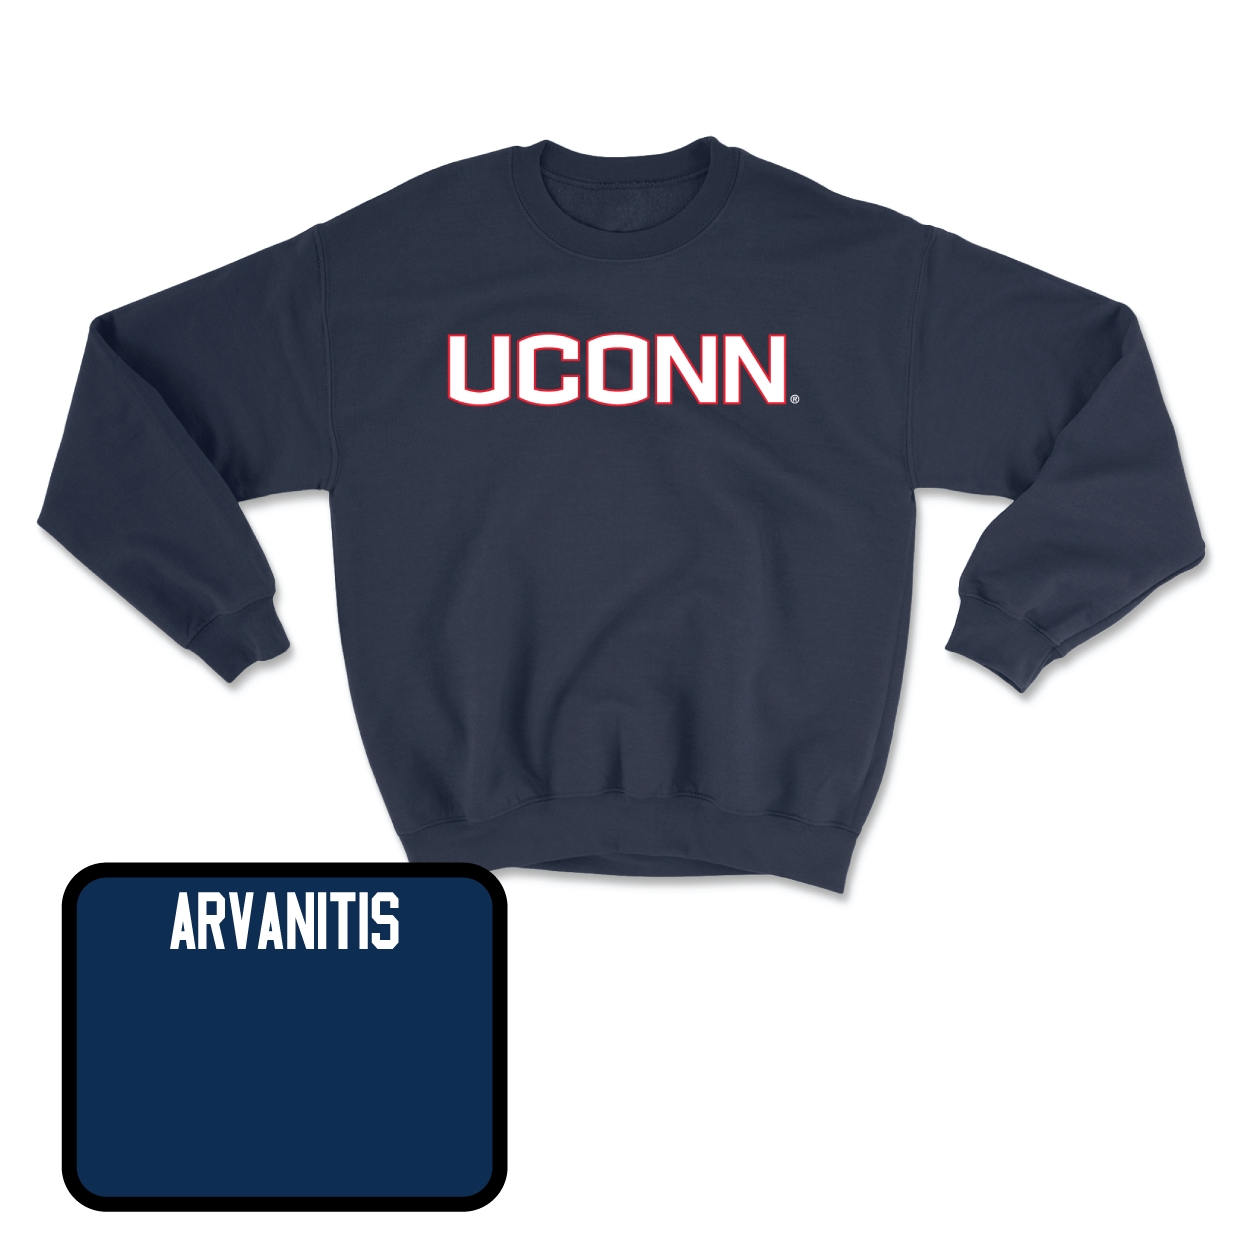 Navy Women's Rowing UConn Crewneck Youth Small / Isabella Arvanitis